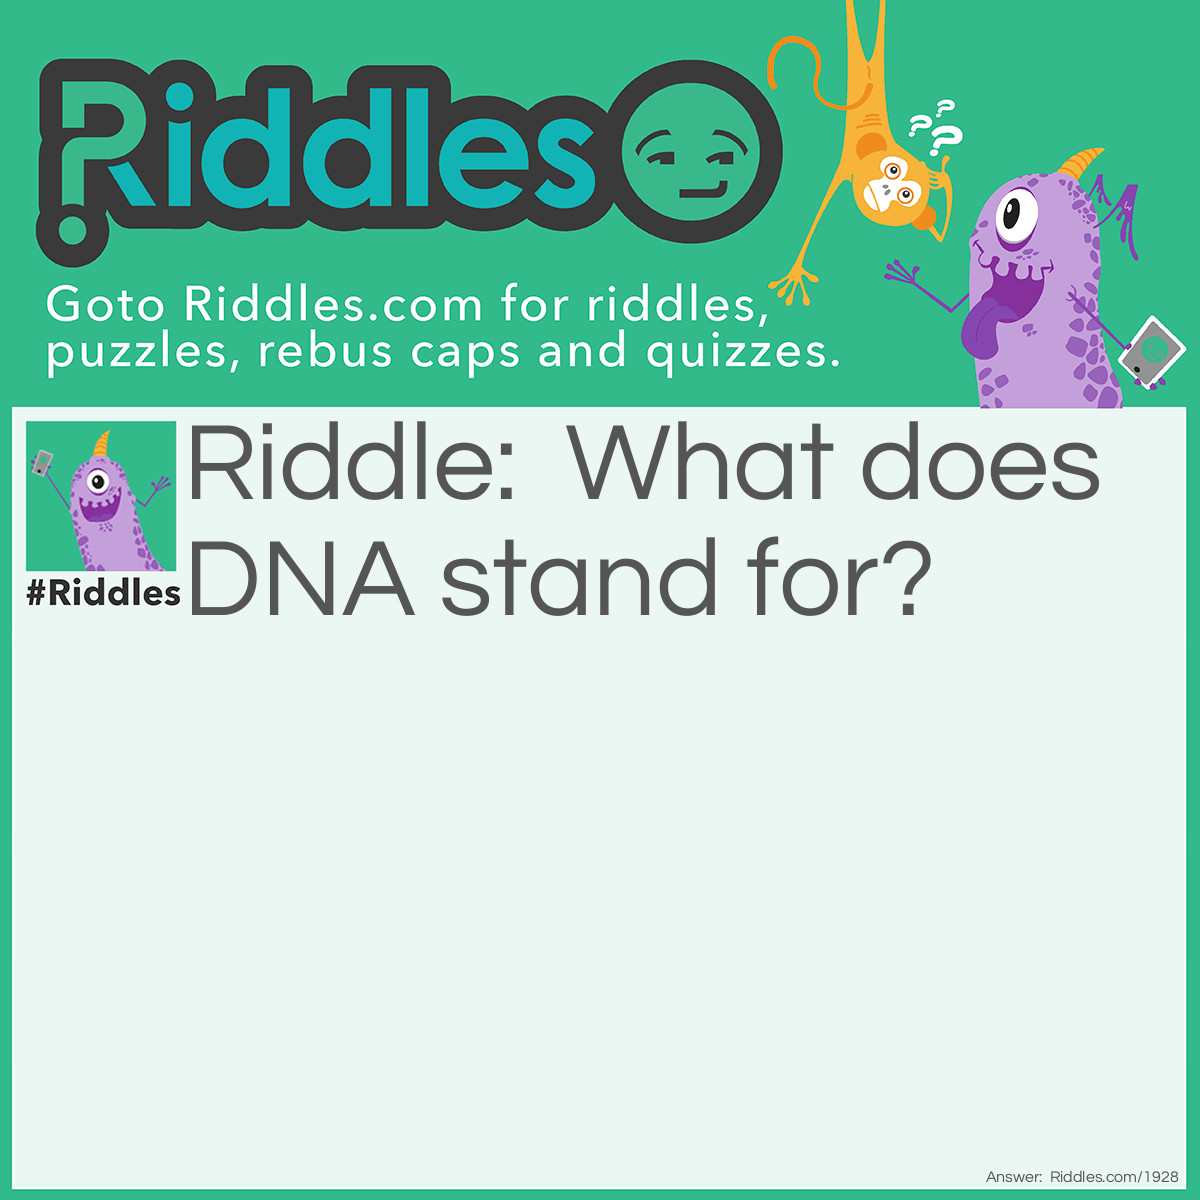 Riddle: What does DNA stand for? Answer: National Dyslexics Association.